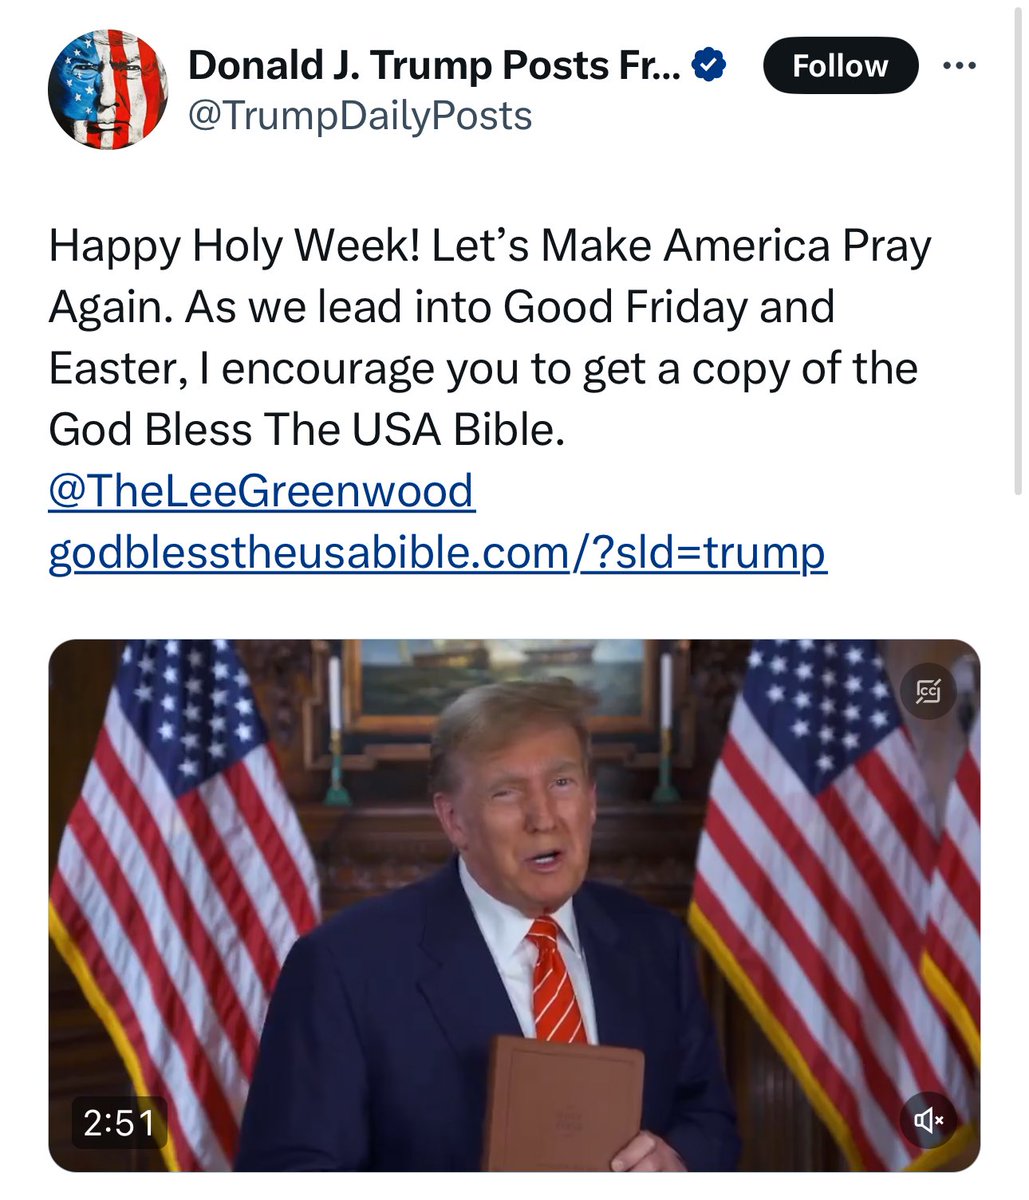 Happy Holy Week, Donald. Instead of selling Bibles, you should probably buy one. And read it, including Exodus 20:14.